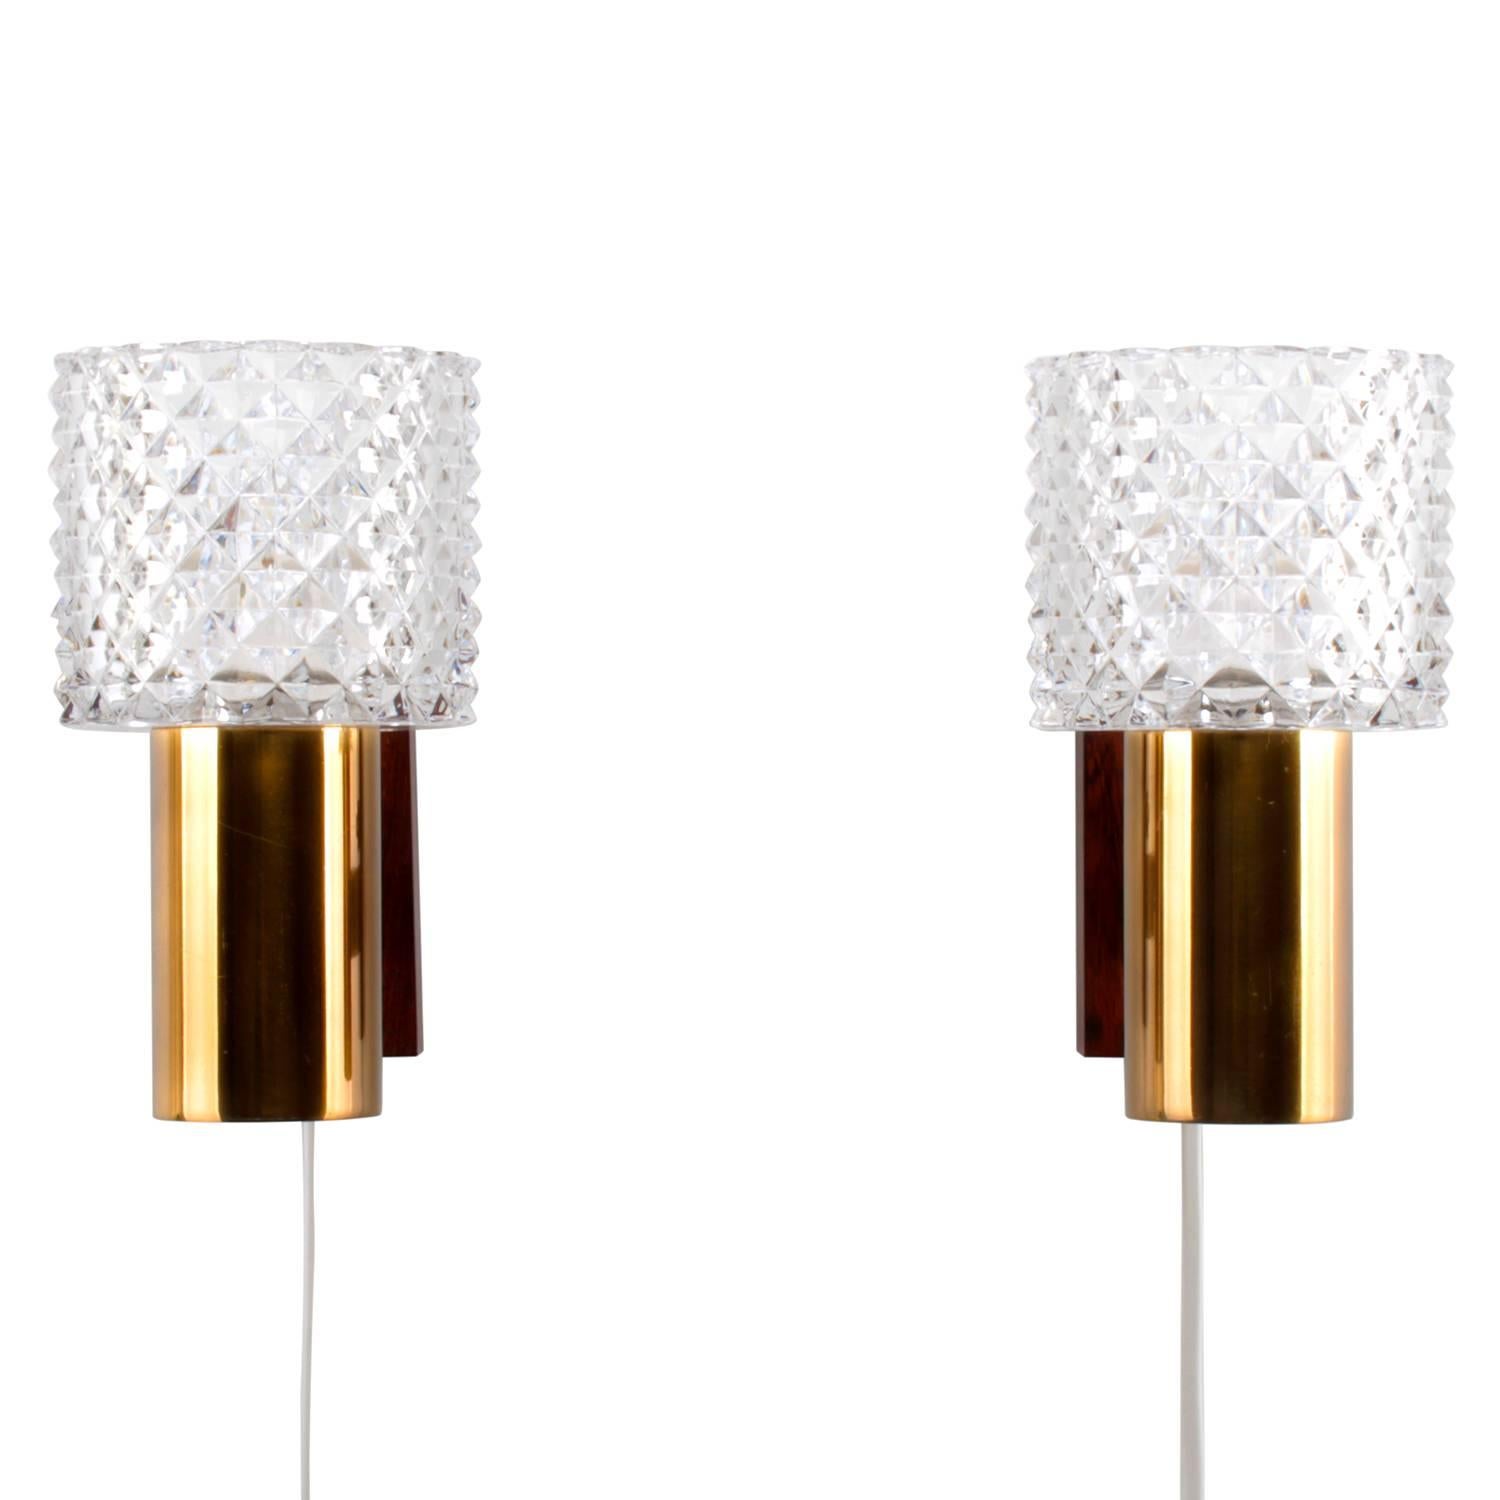 Mid-Century Modern Crystal Glass and Rosewood Pair of Wall Sconces, 1960s Danish Lighting Design